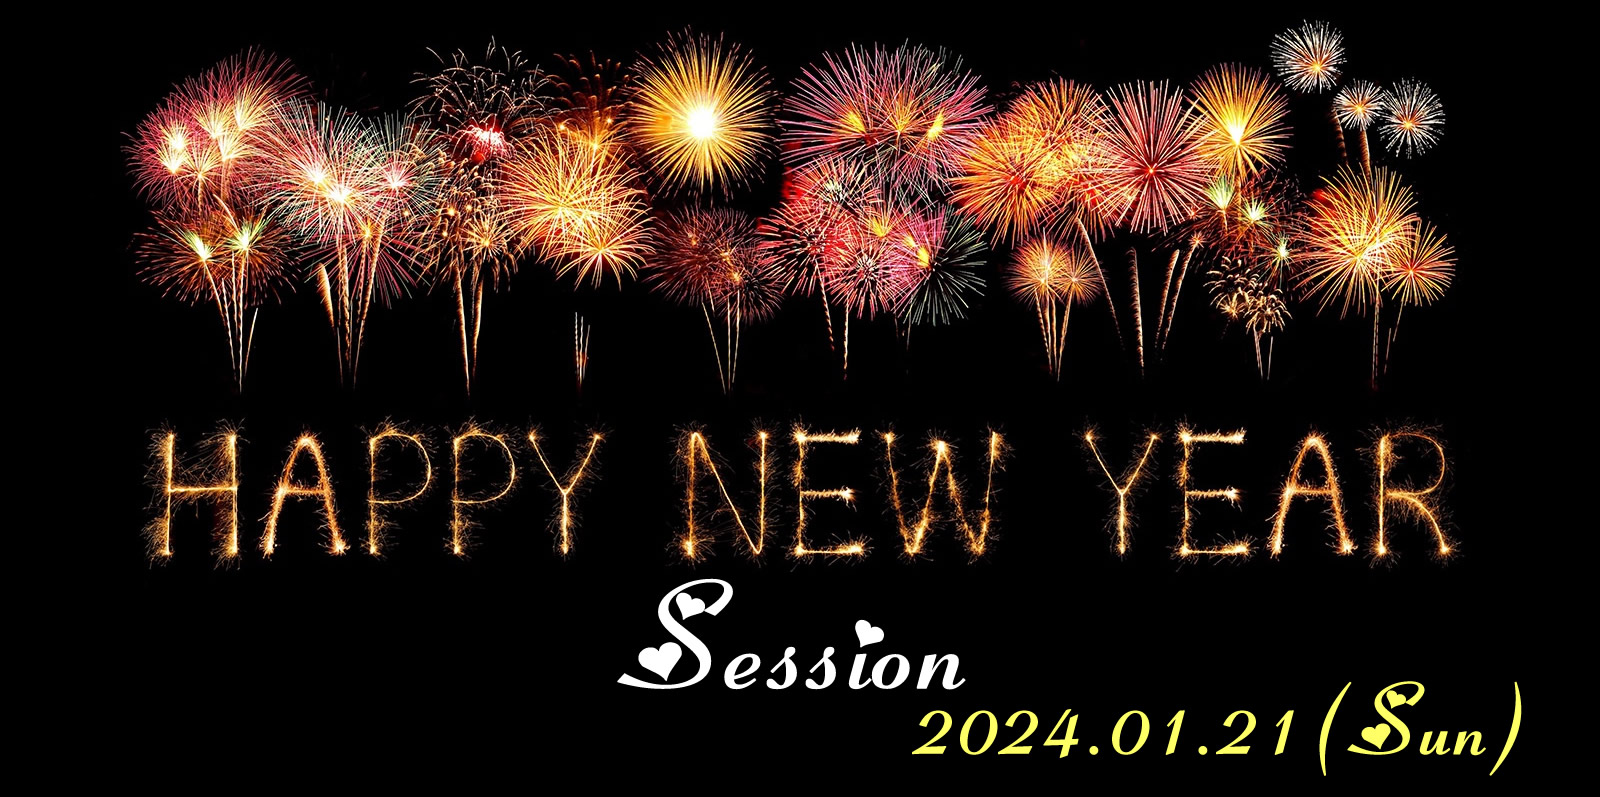 A New Year Session 2024!!